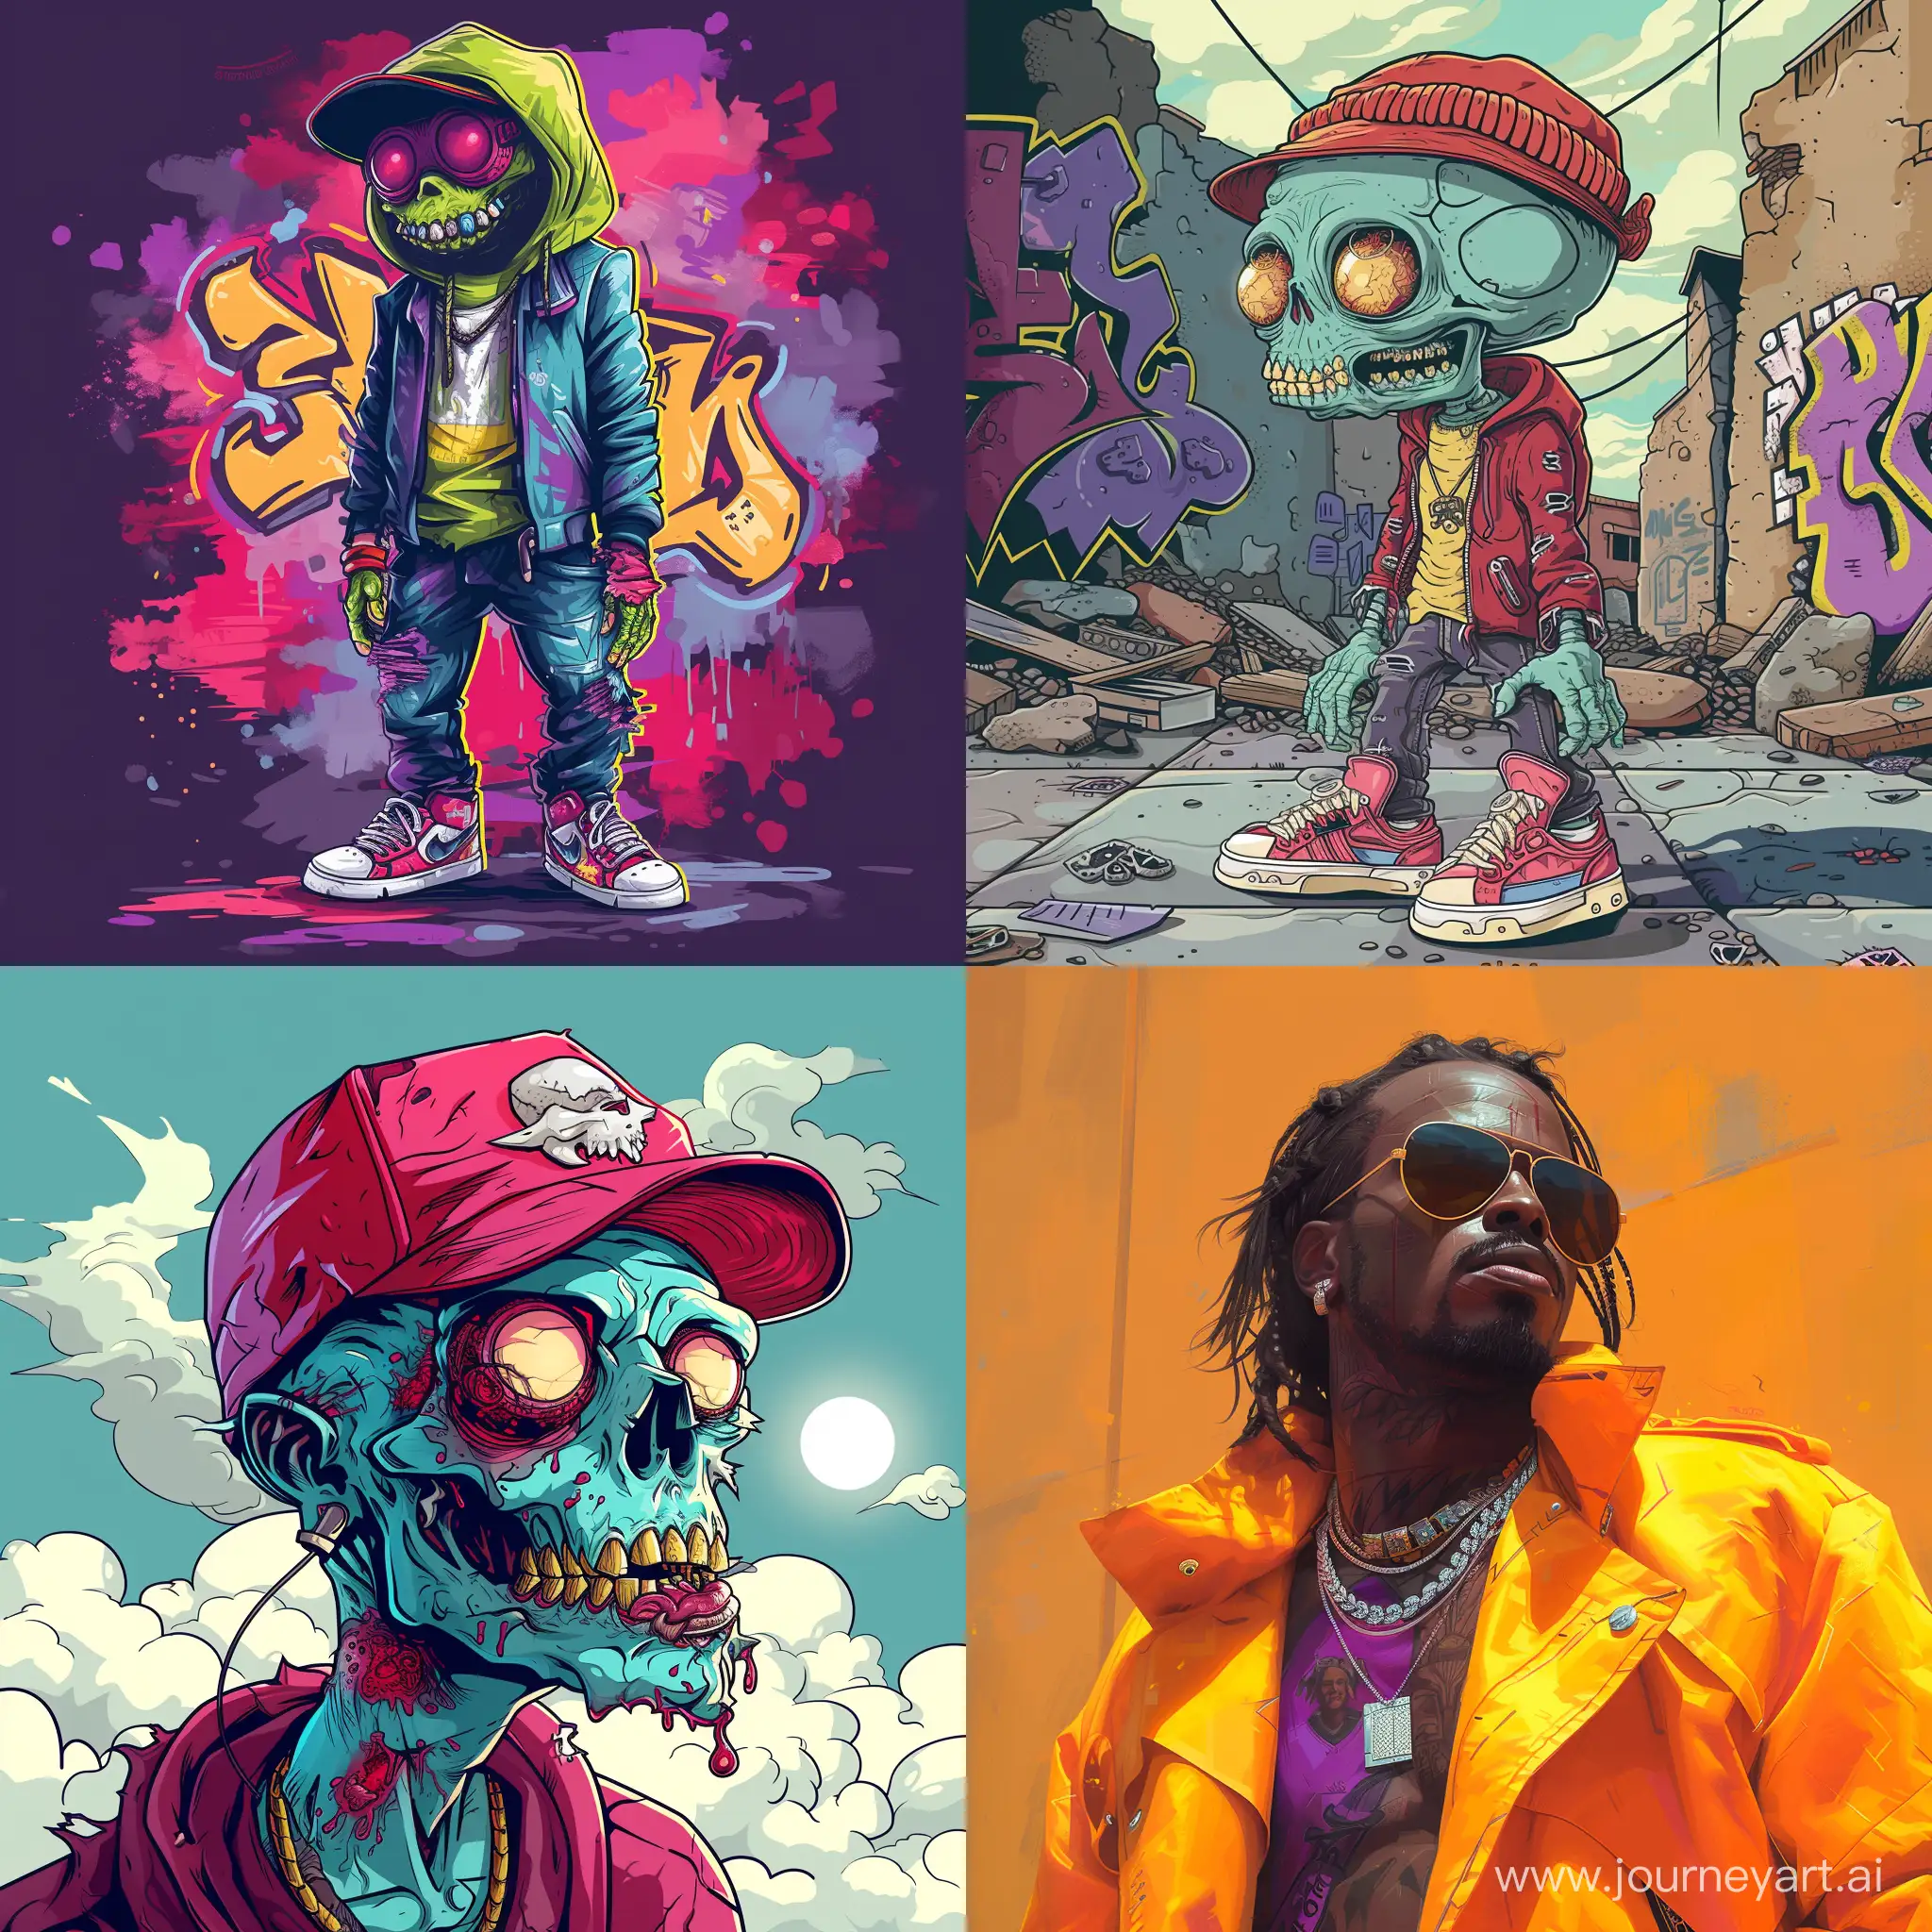 Tough gangster rapper zombie ::5 Plants vs Zombies game style ::4 Holding a white double cup with purple liquid inside ::3 Dangerous aura, banned substances - promethazine, xanax, marijuana, codeine ::2 Unique character design, rapper style clothing ::2 Sinister expression, glowing eyes ::1 --s 250